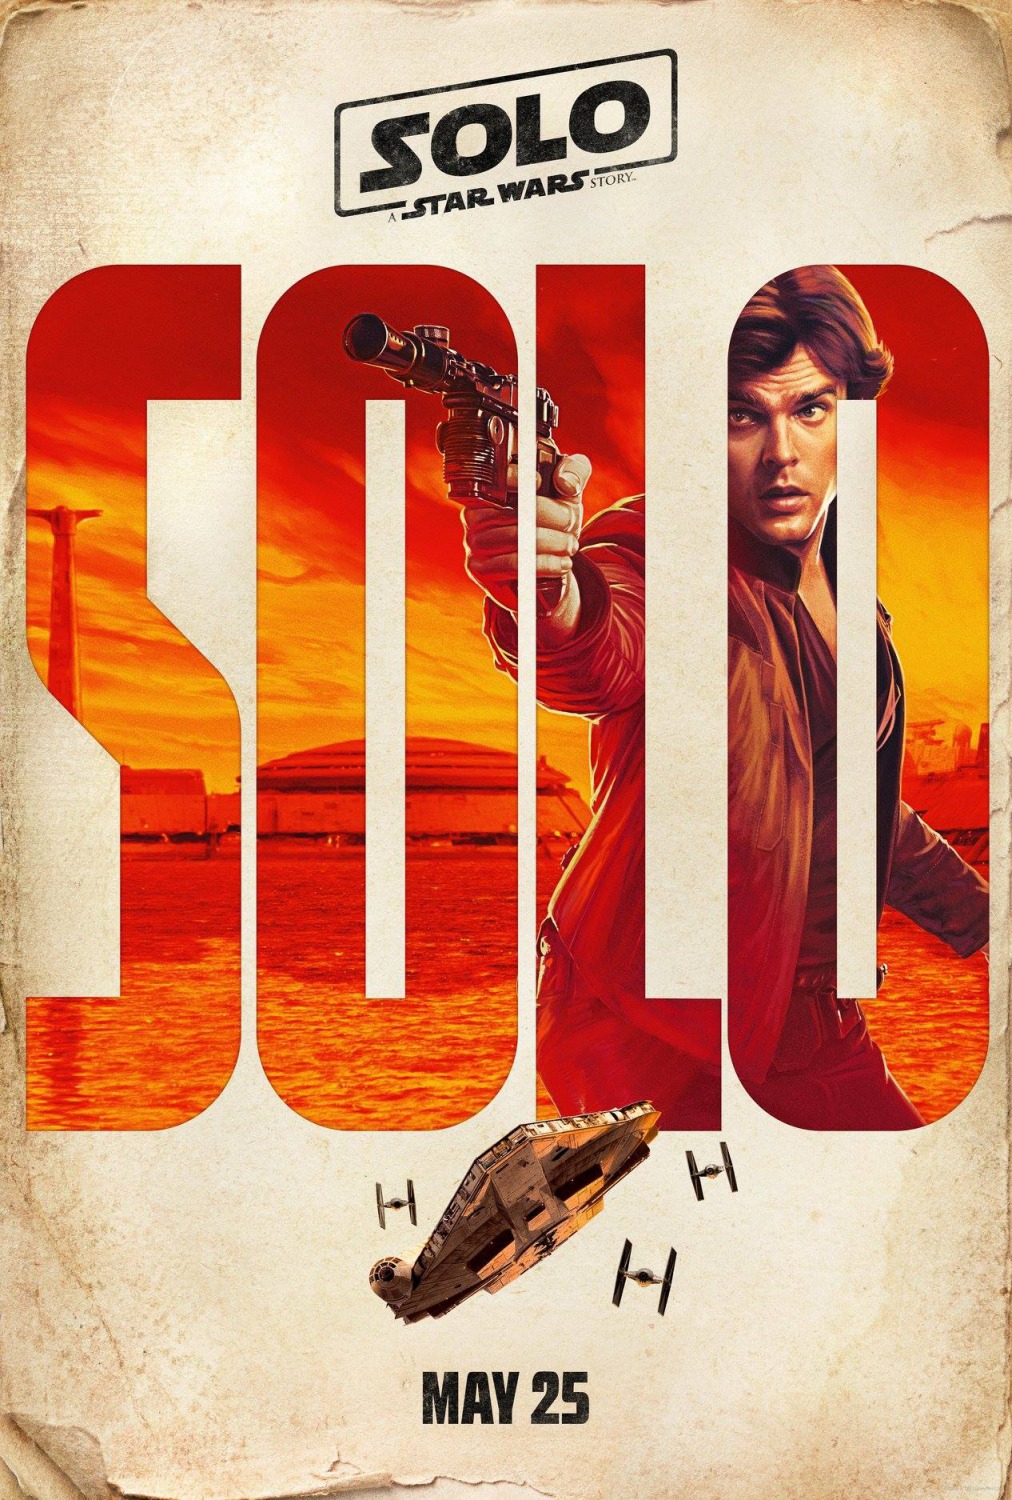 Solo – A Star Wars Story